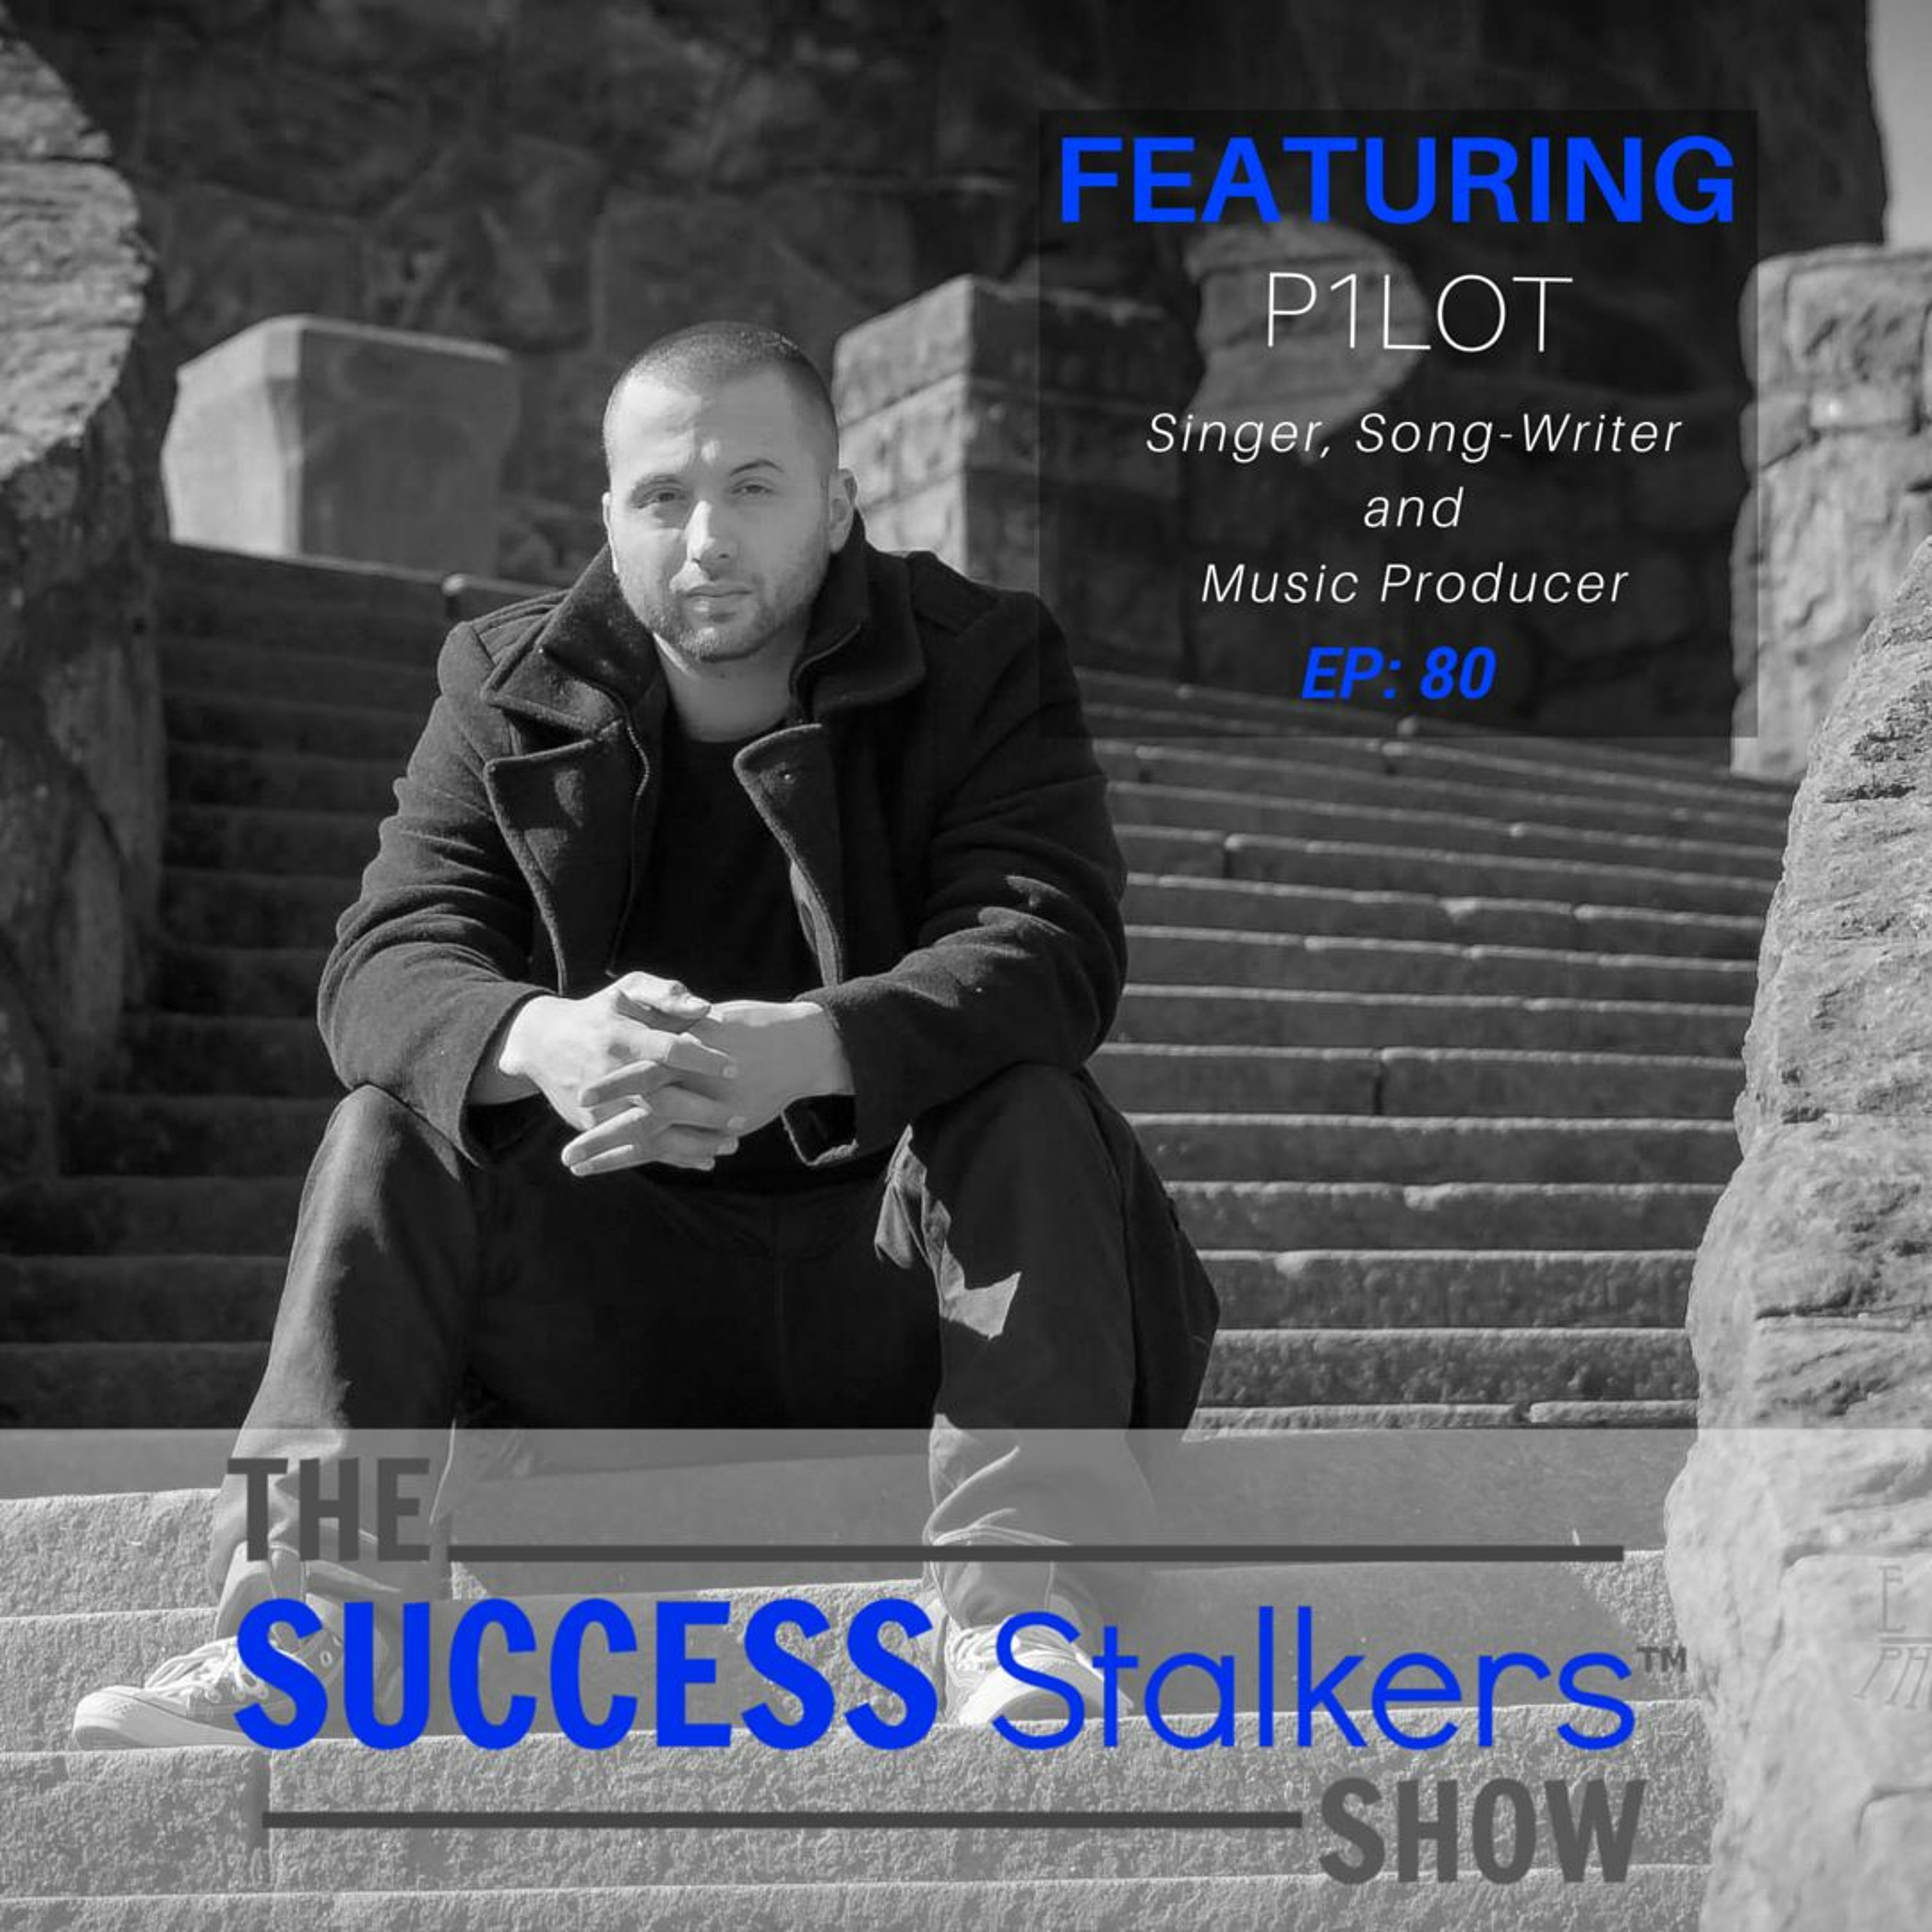 80: Singer, Song Writer & Music Producer, P1LOT Shares His Success Journey Image